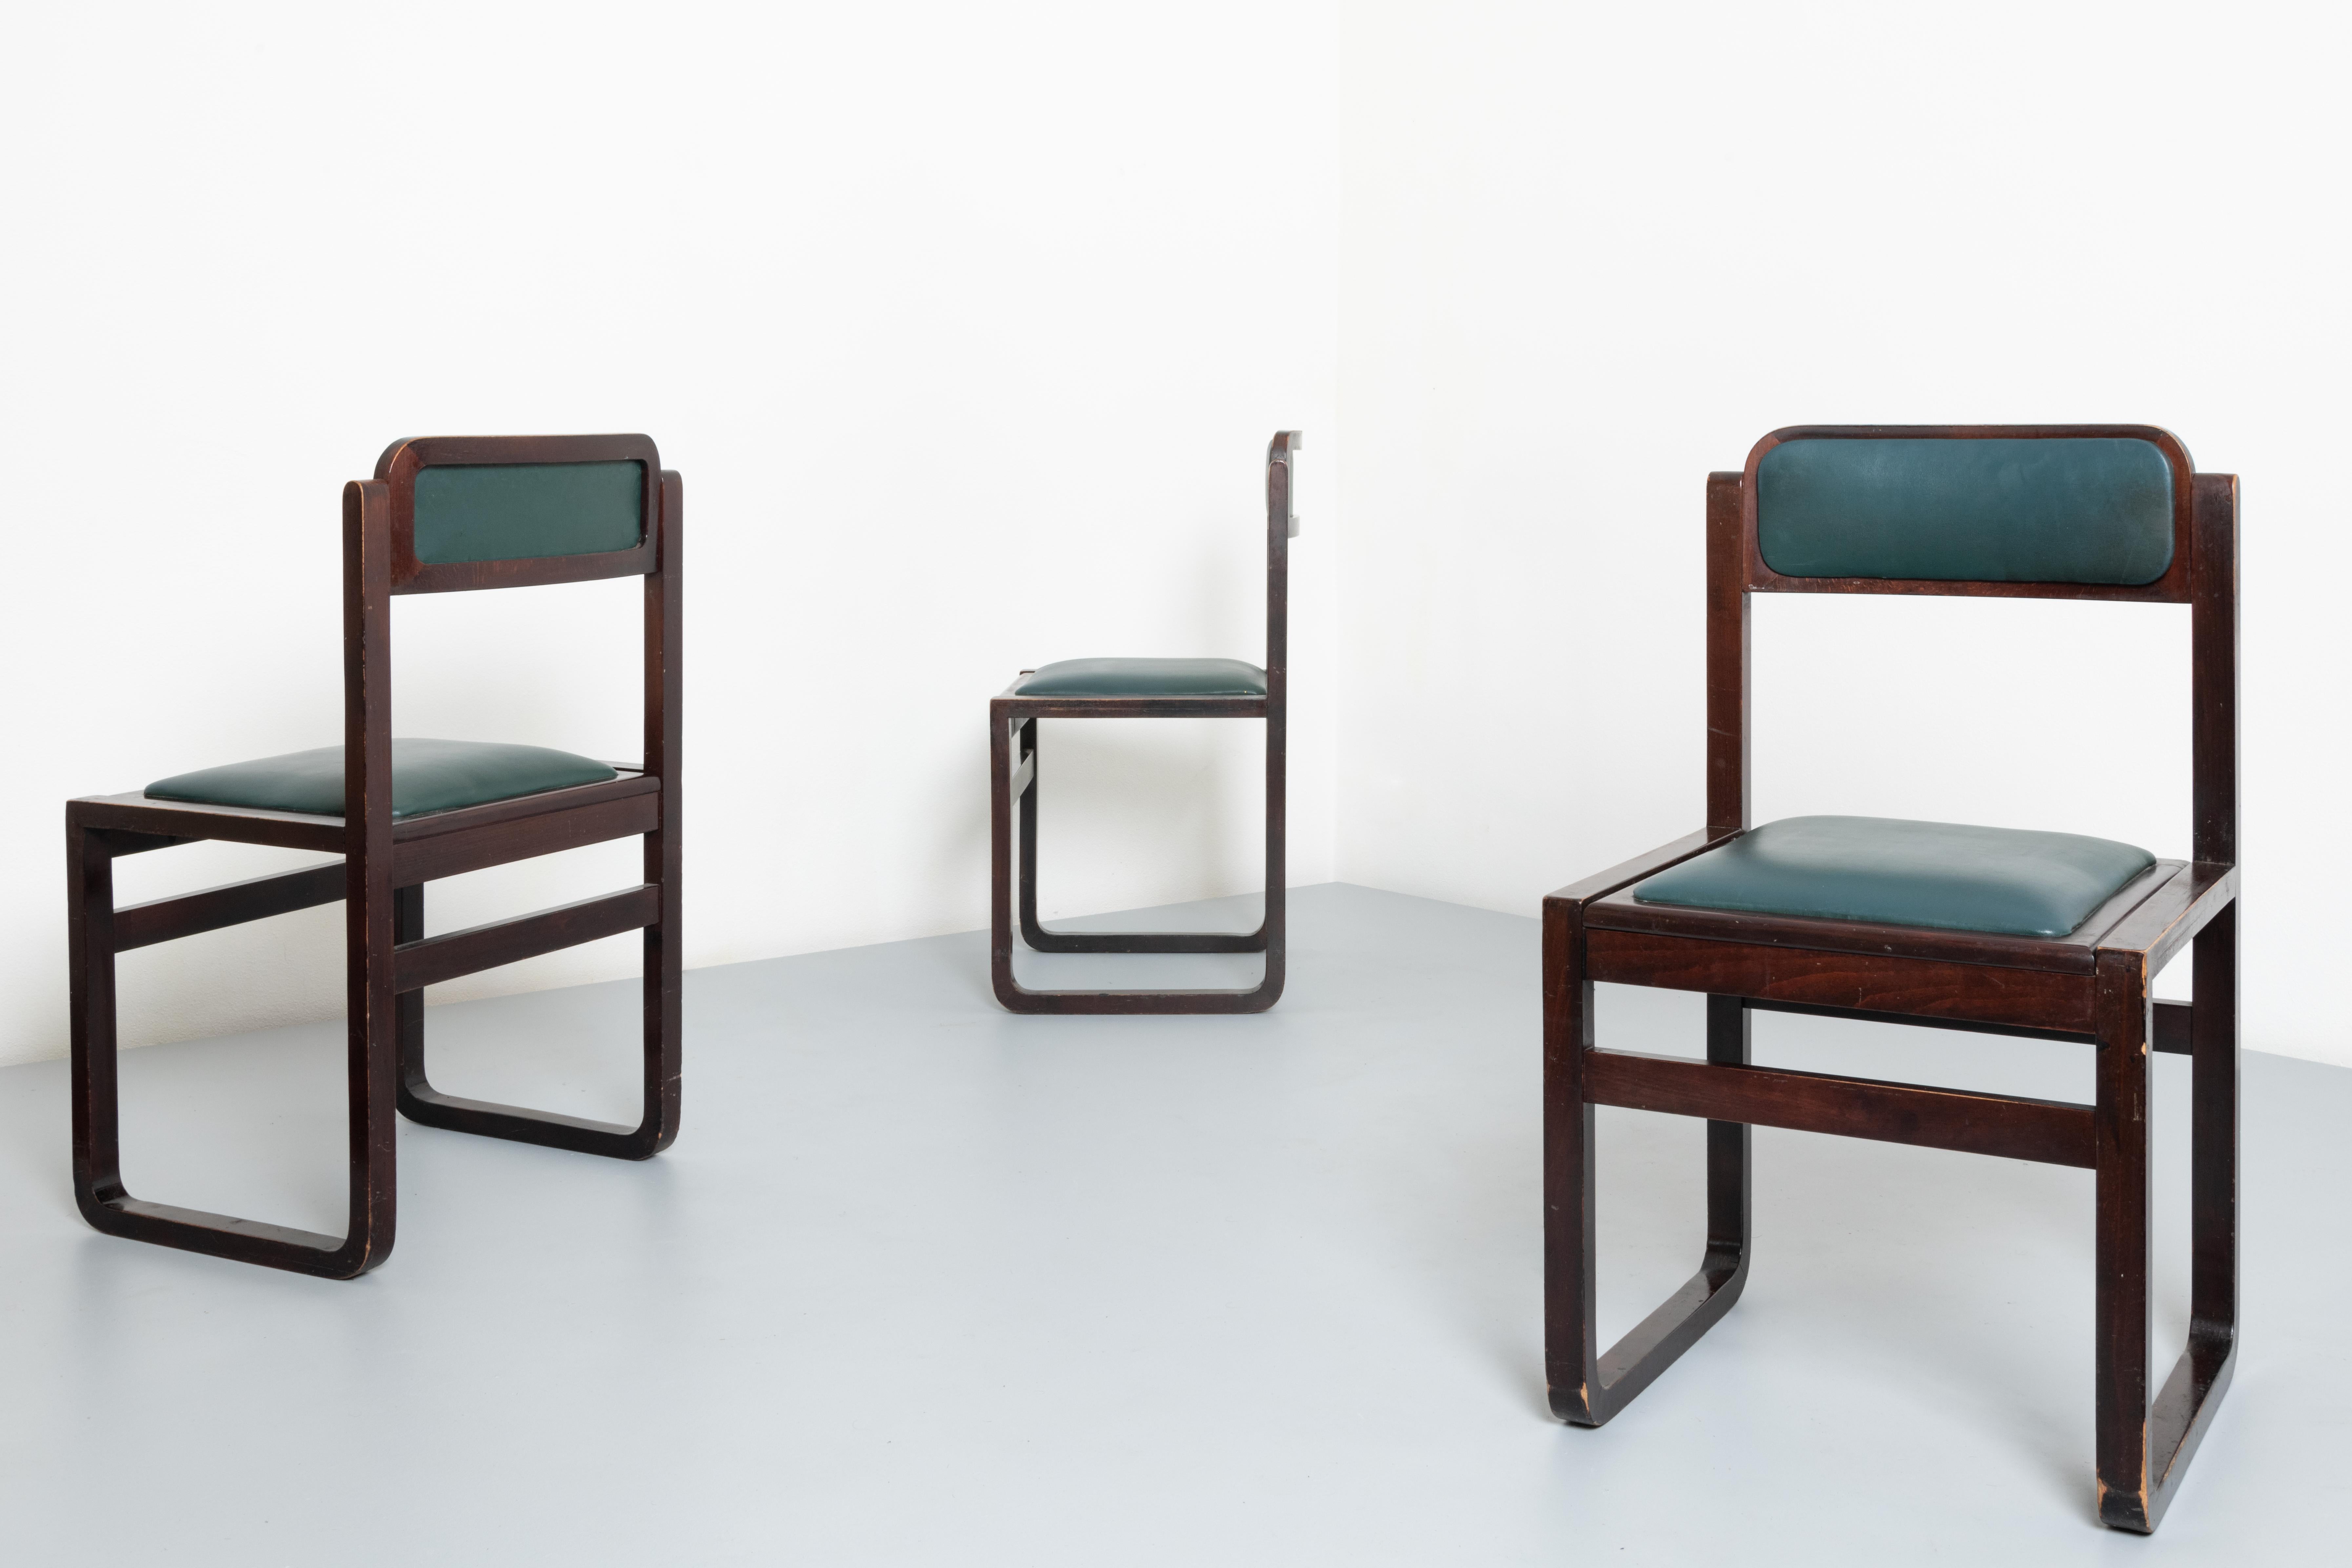 Prod. Italy, C. 1960-1970 Six Chairs in Walnut Wood and Leather Seats For Sale 1